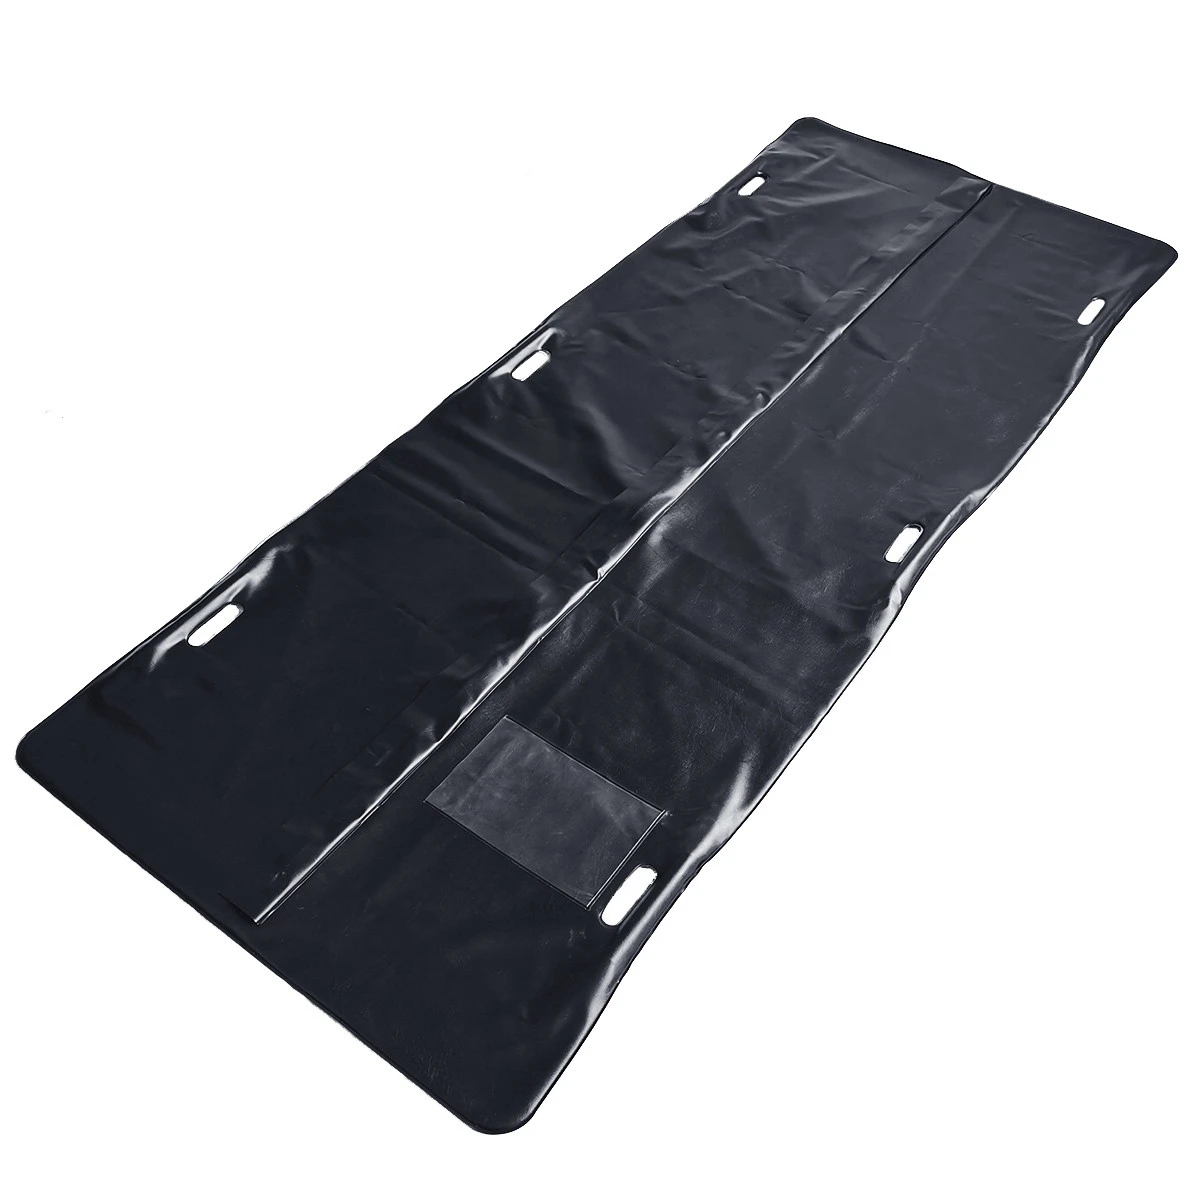 Disposable PVC Cadaver Dead Body Bag Mortuary Corpse Bag With Handle